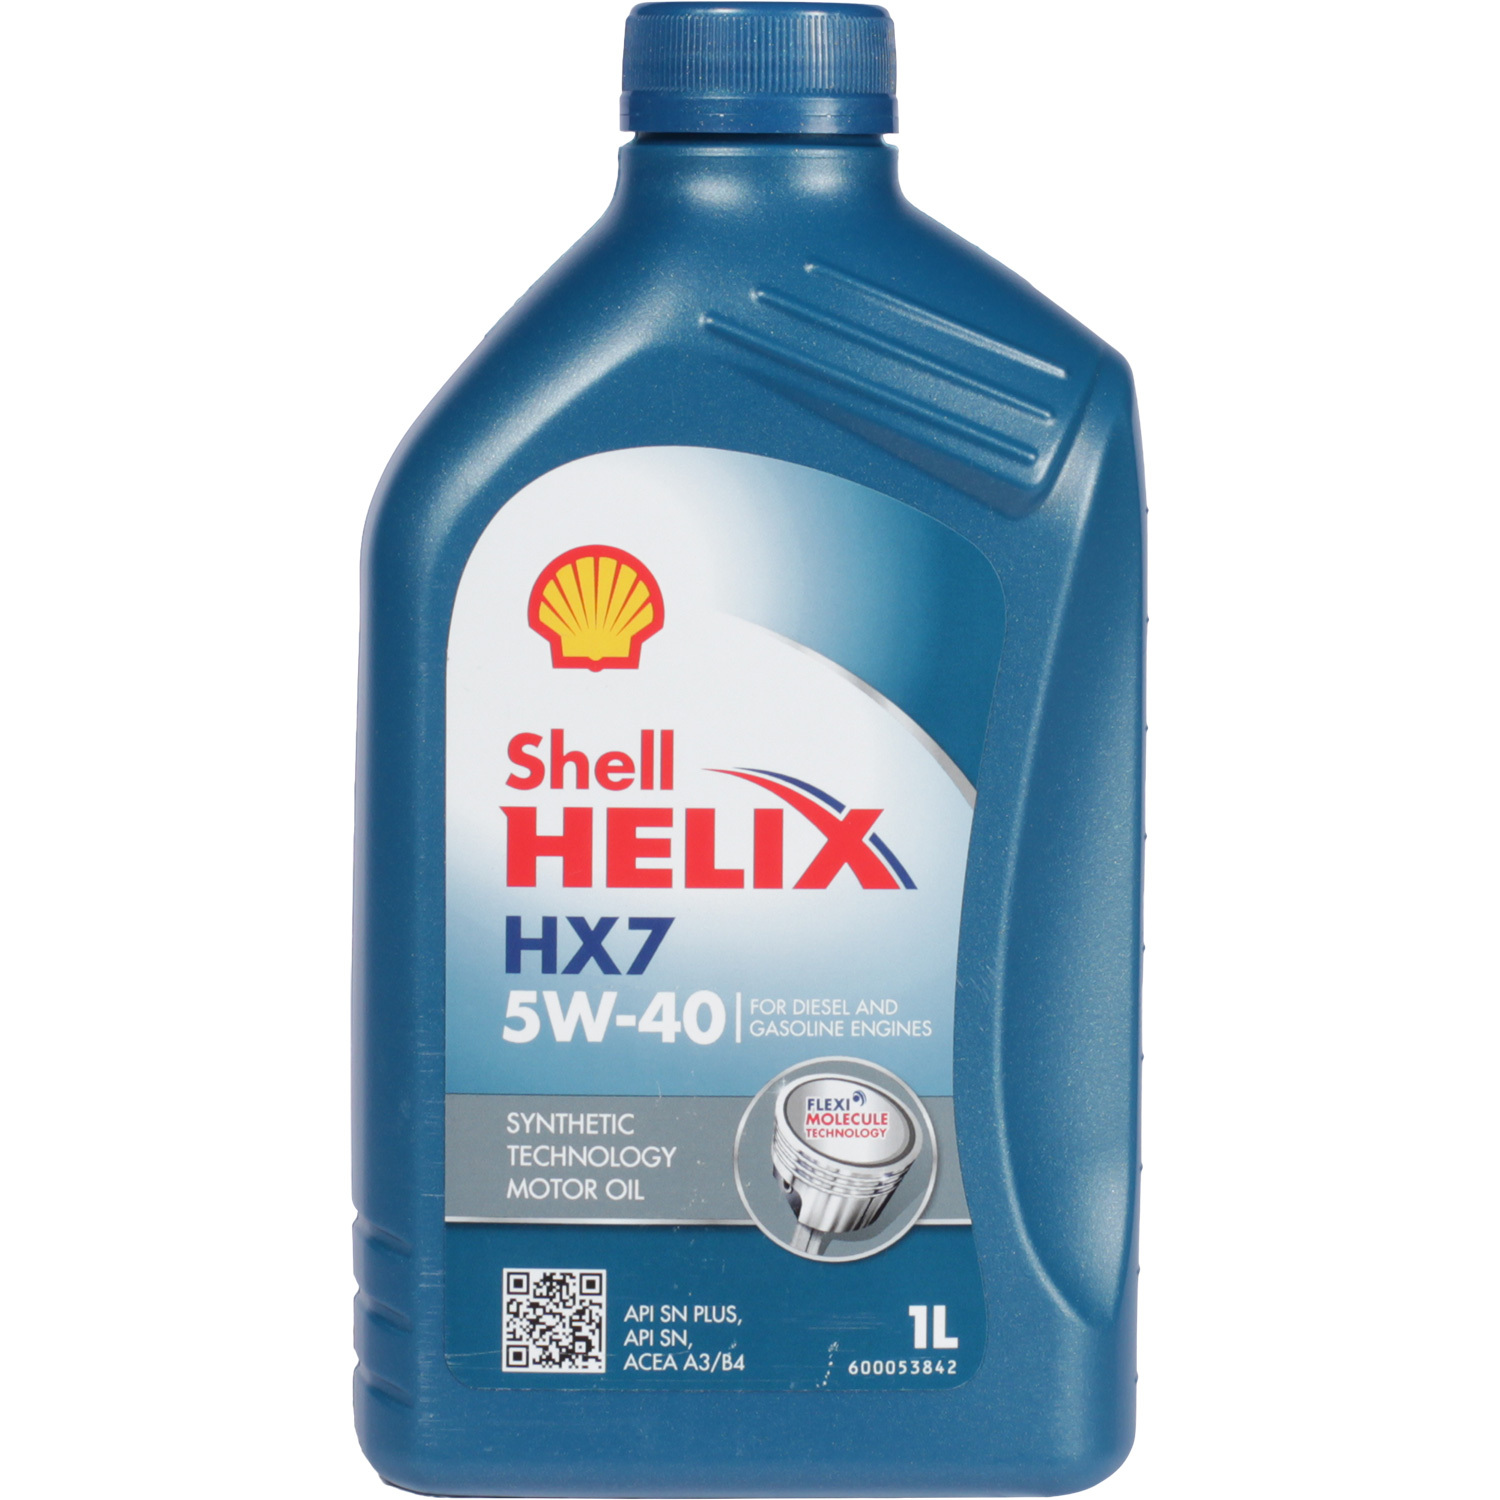 Shell Моторное масло Shell Helix HX7 5W-40, 1 л